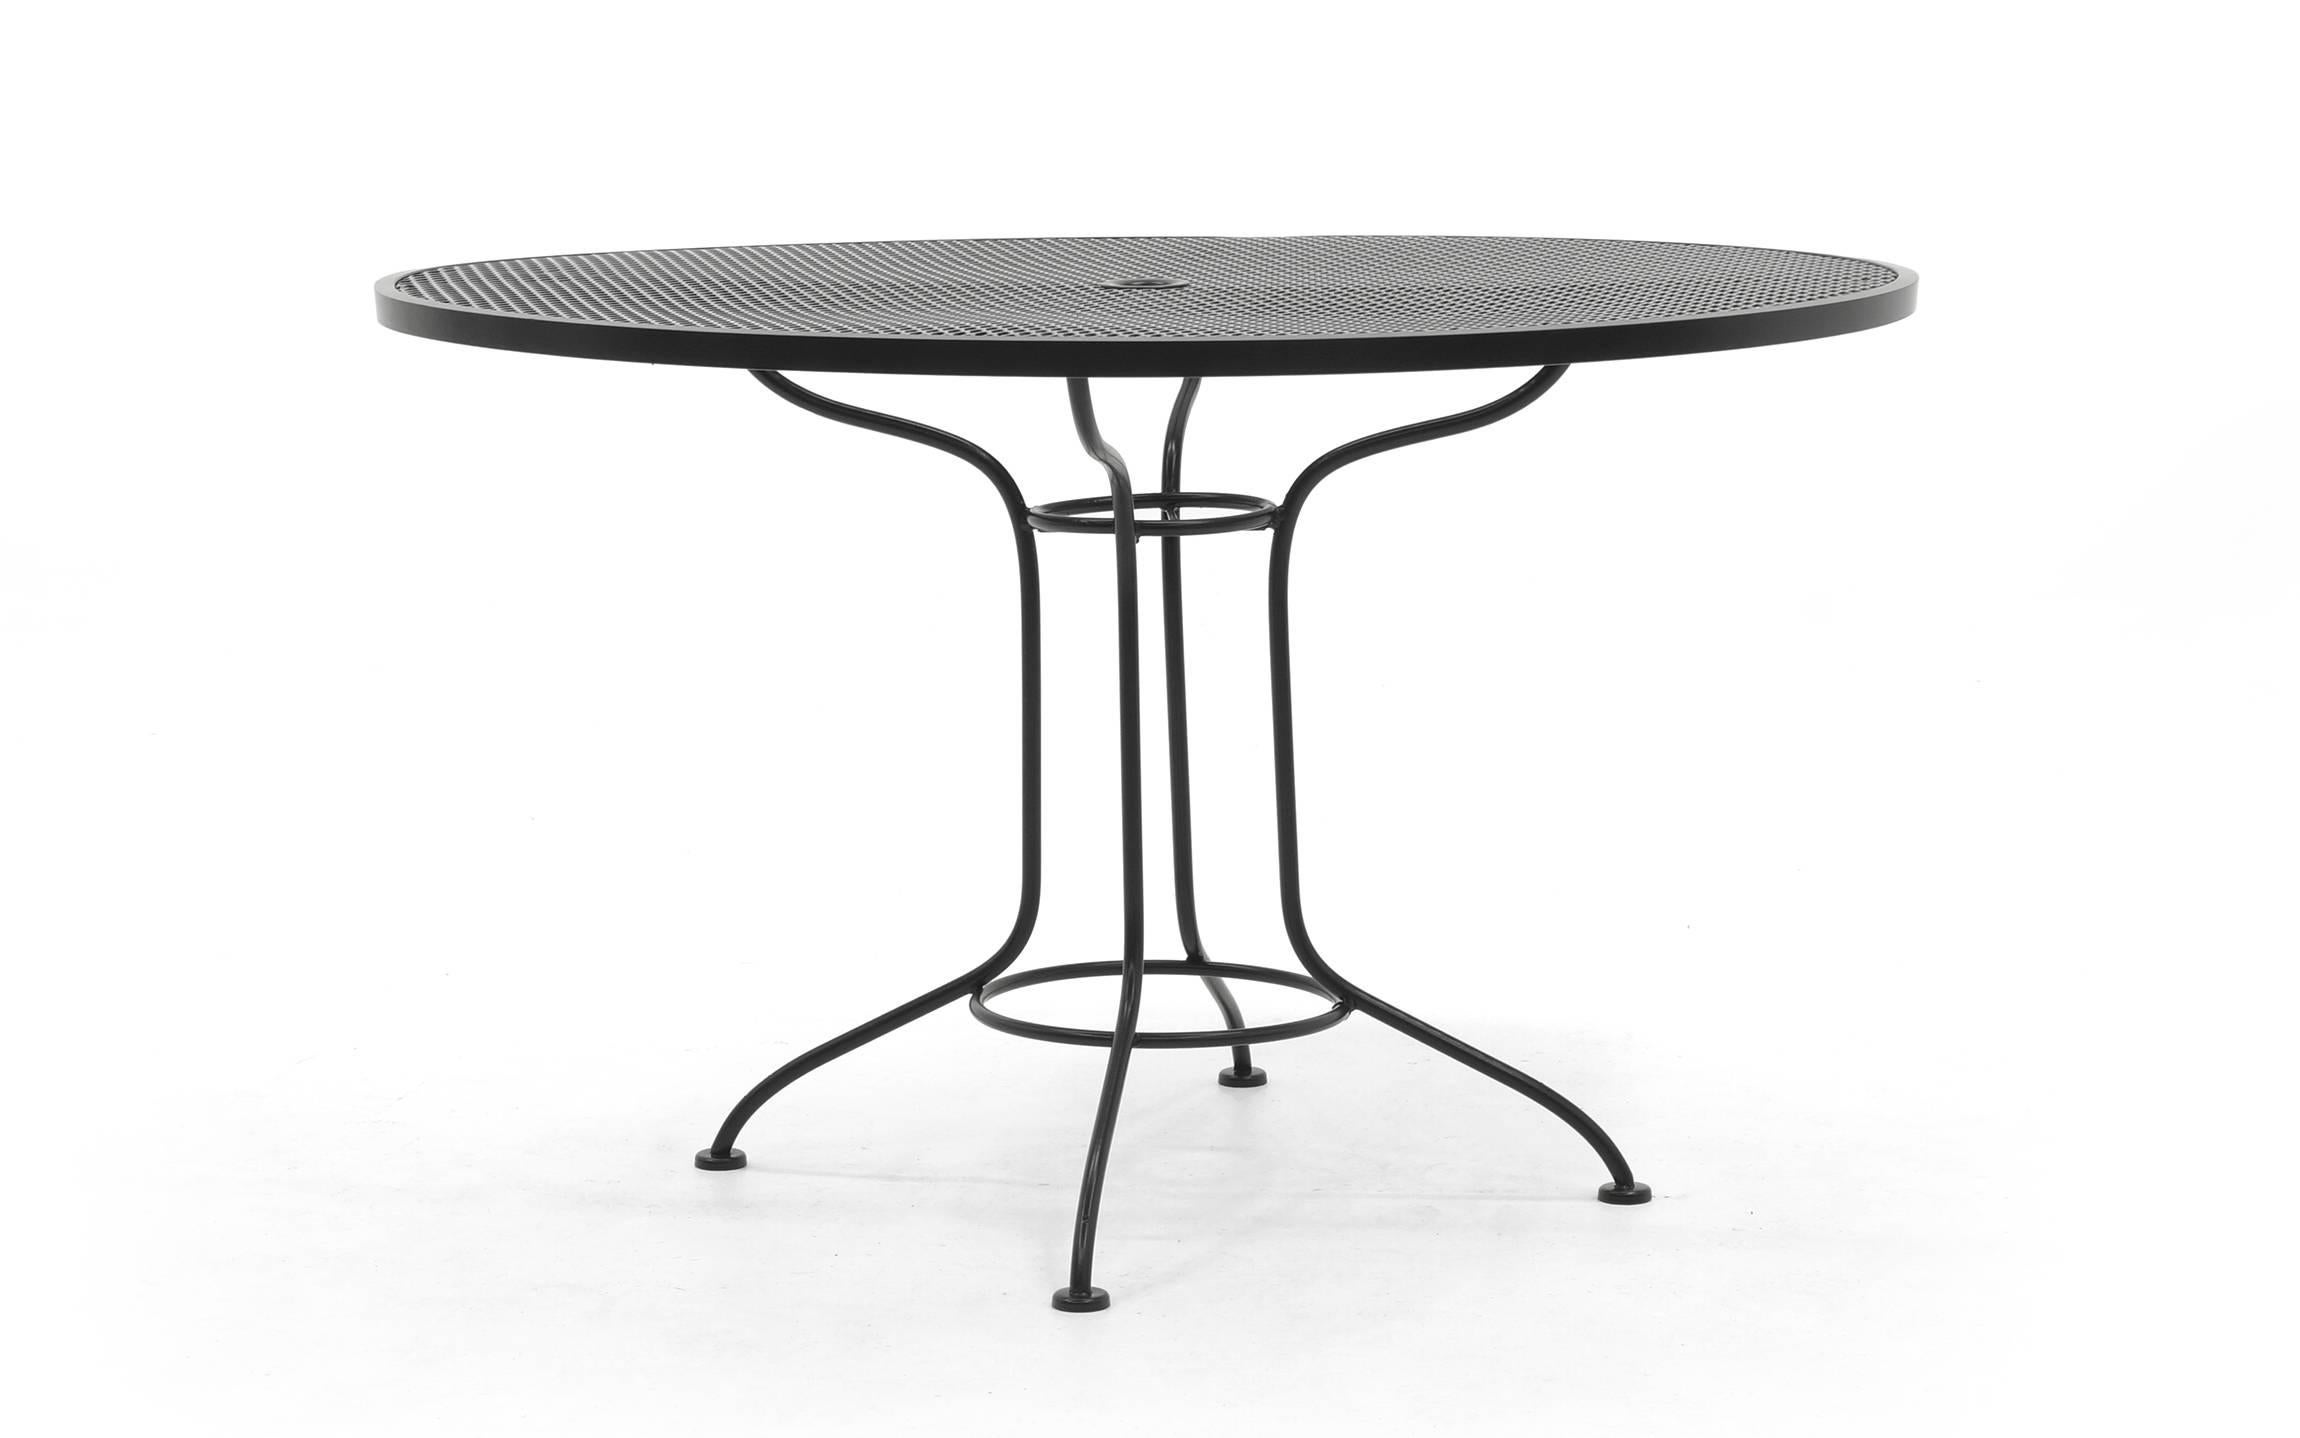 Mid-20th Century John Salterini Outdoor/Patio Dining Table and Four Chairs, Expertly Restored